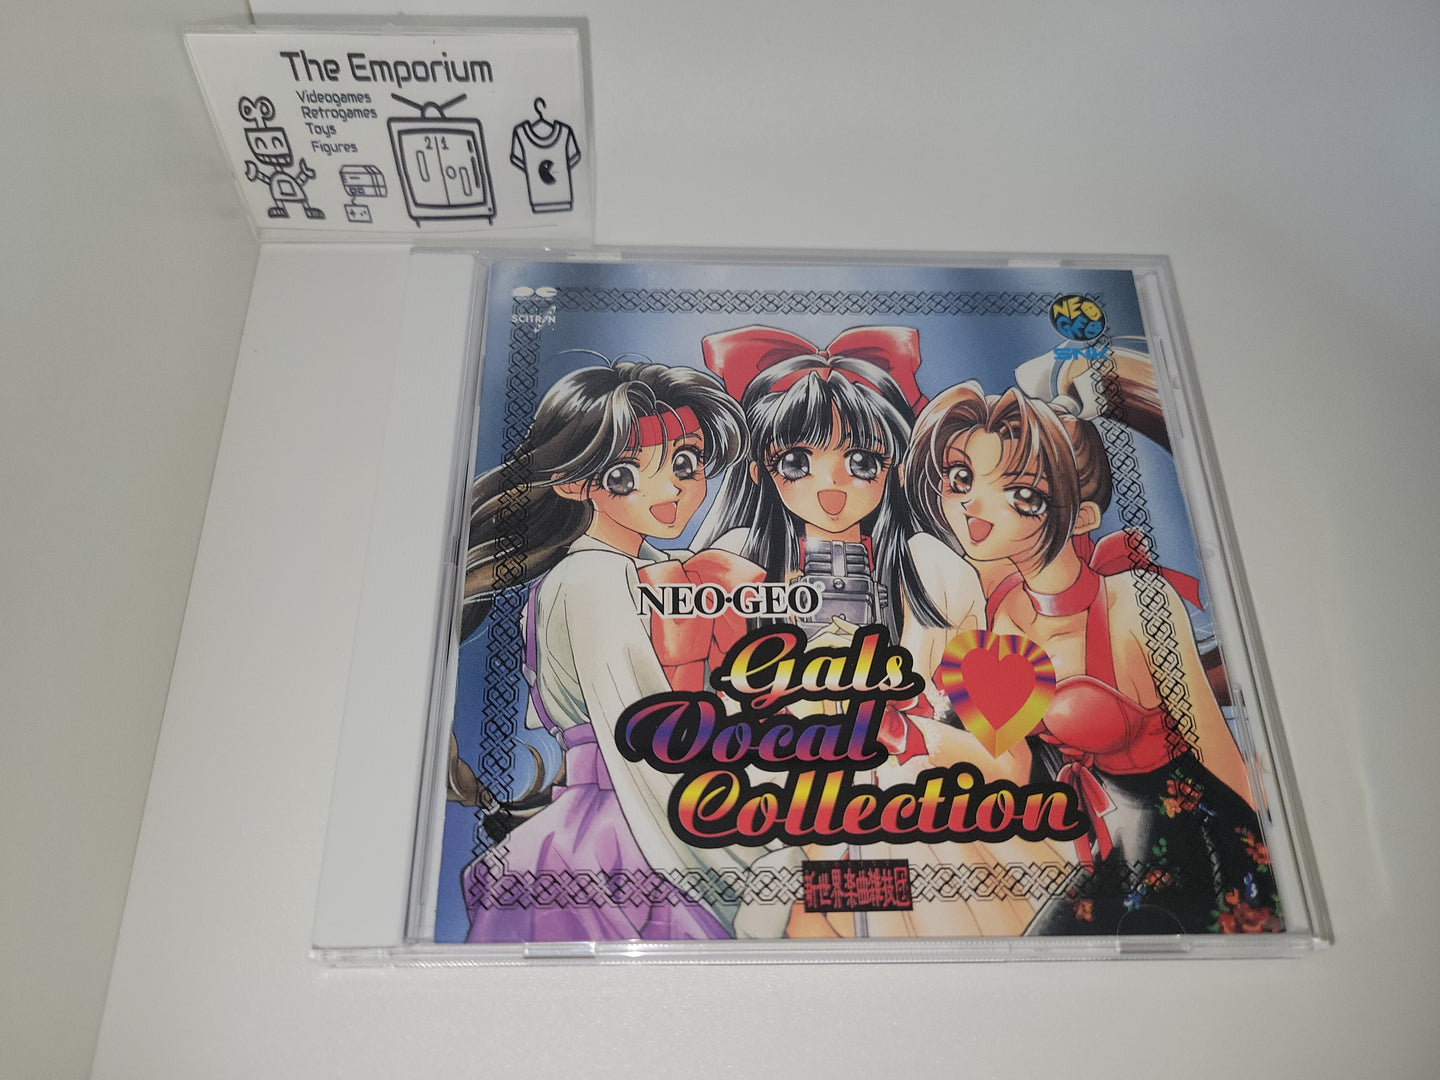 NEO-GEO GalsVocal Collection - Music cd soundtrack